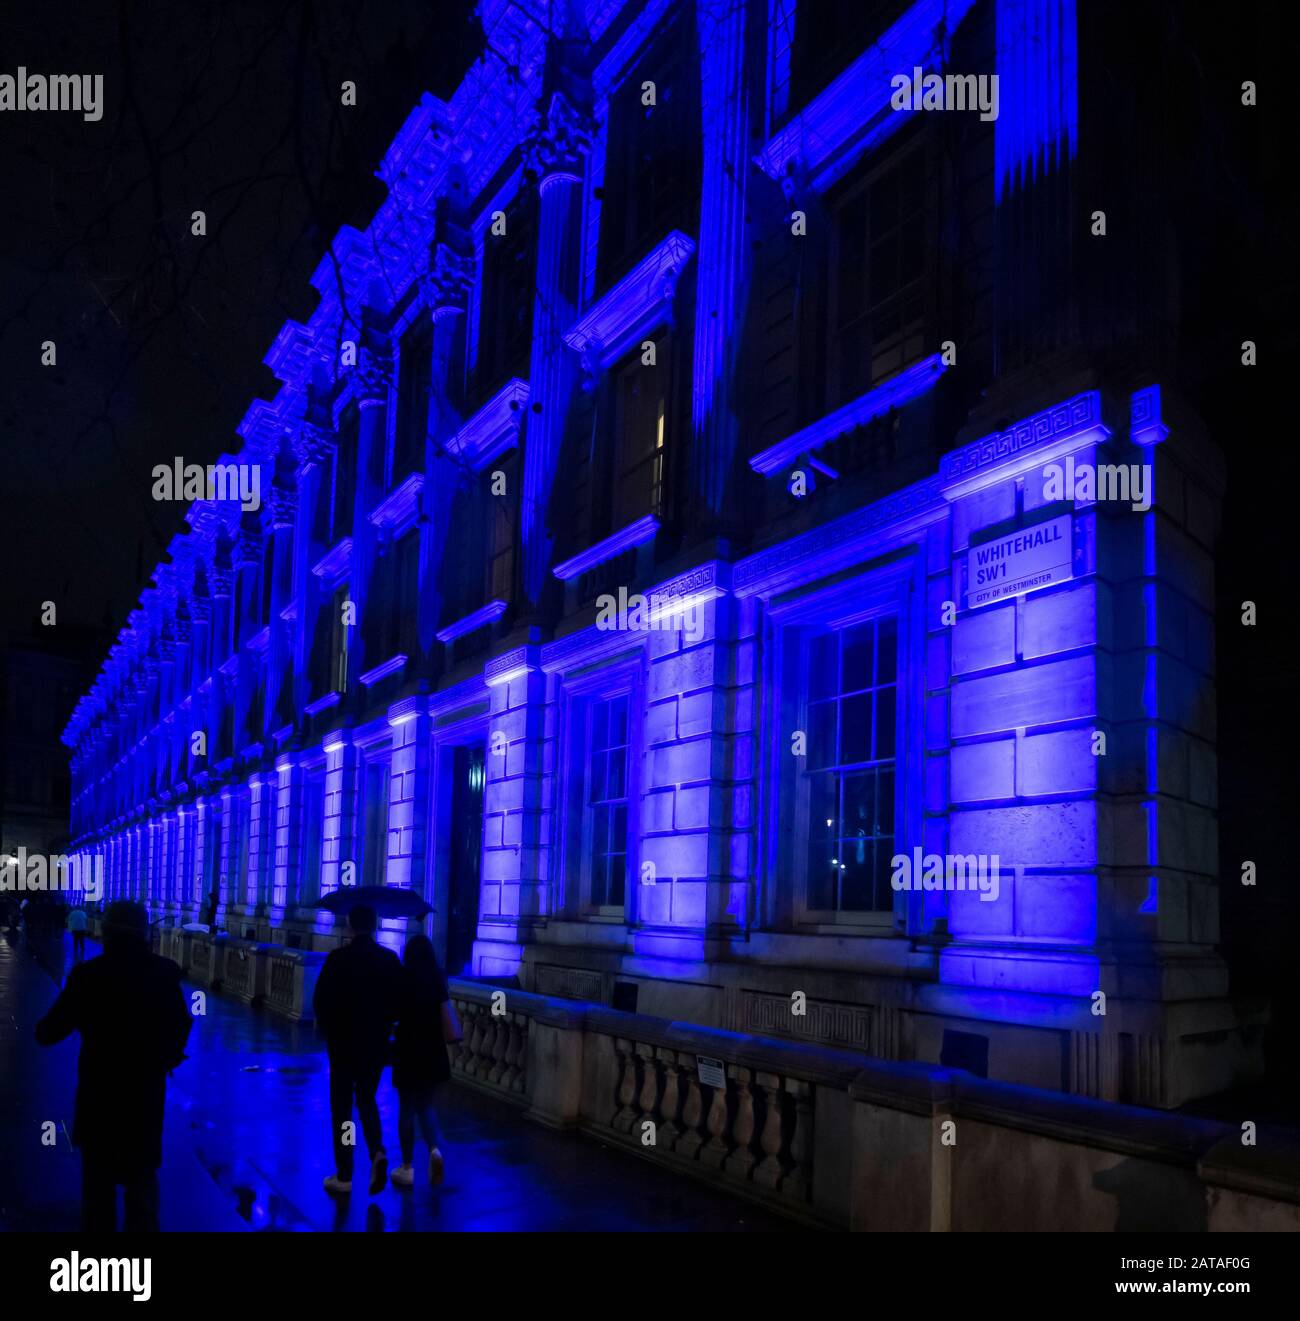 Whitehall, London, UK. 31st January 2020. The Cabinet Office Government Building in Whitehall is floodlit blue to mark the UK leaving the EU at 11.00pm. Credit: Malcolm Park/Alamy . Stock Photo